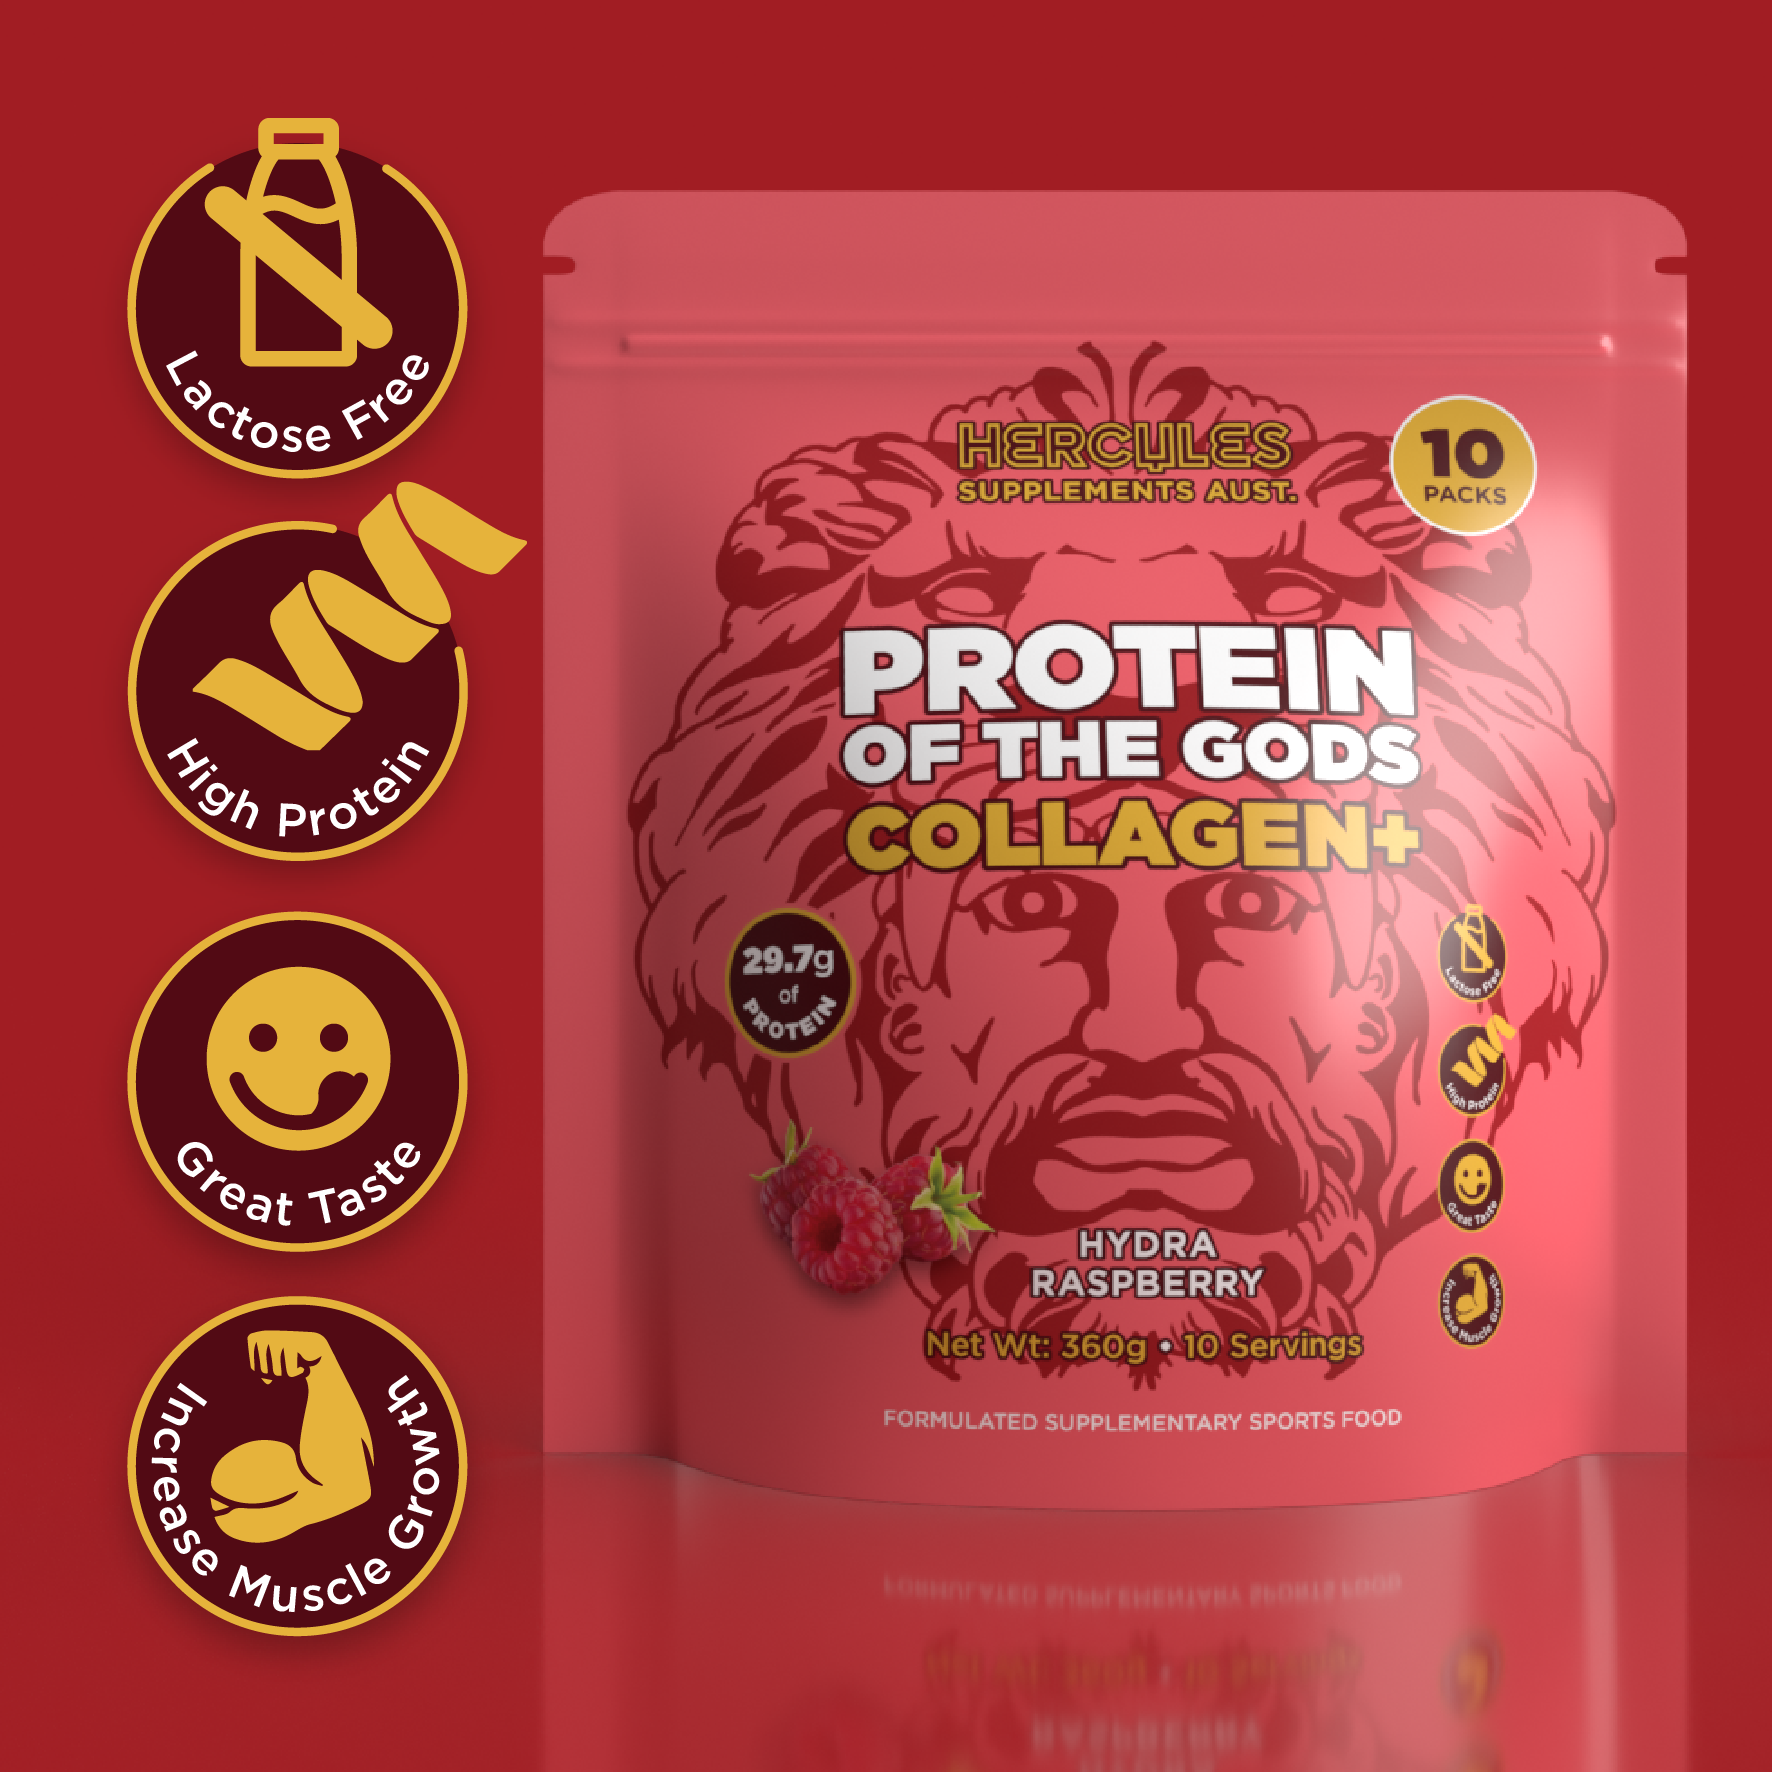 Protein of the Gods Collagen Plus - Hydra Raspberry - 10 pack